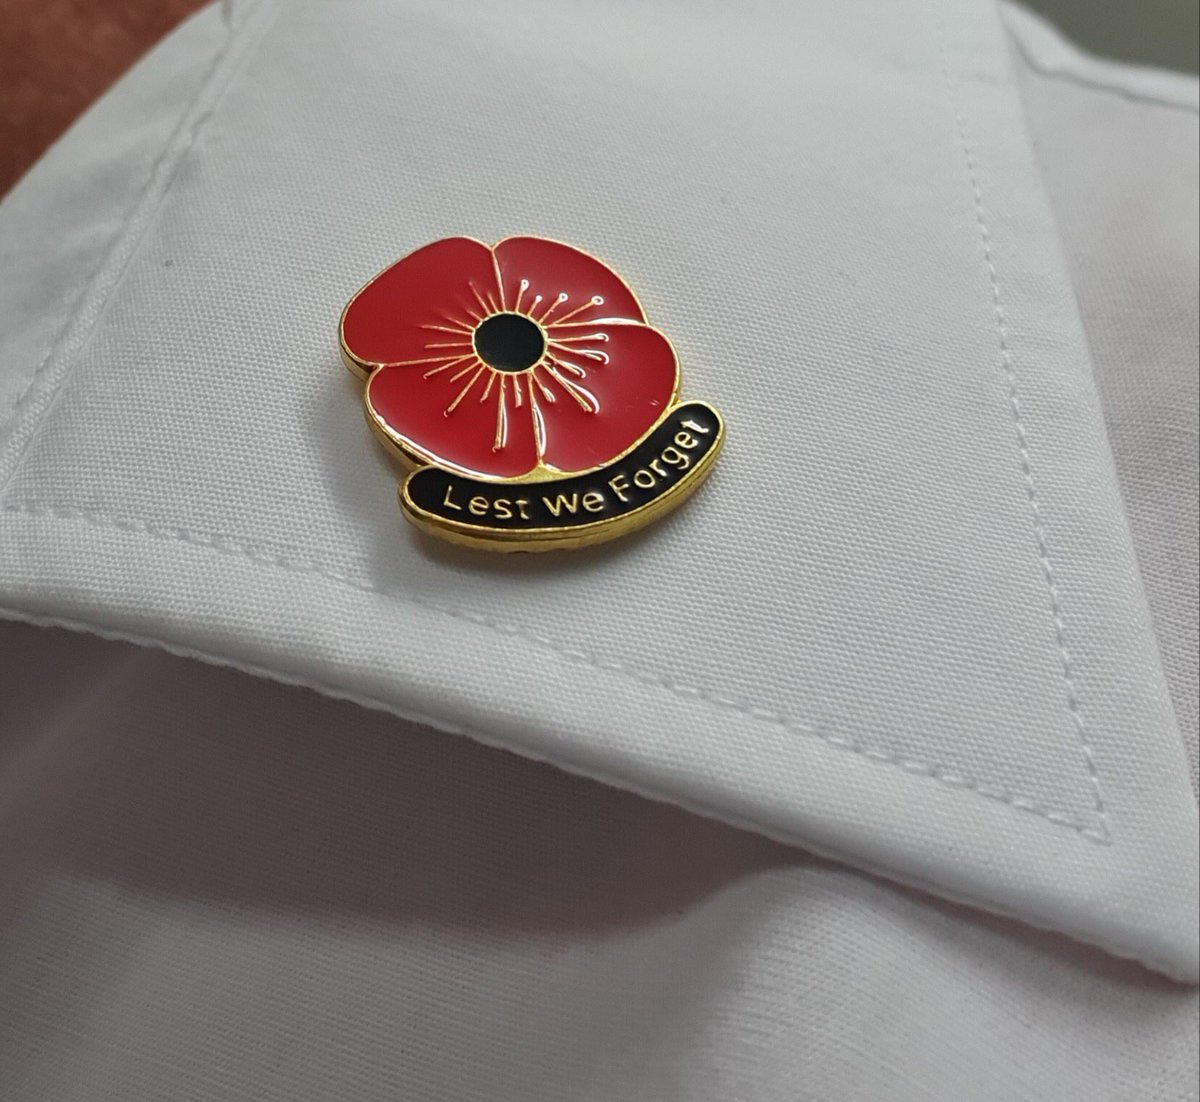 Had my #RemembranceDay pin on today.

#LestWeForget #RemembranceDay2020 #RememberanceDay #lestweforge #lestweforget2020